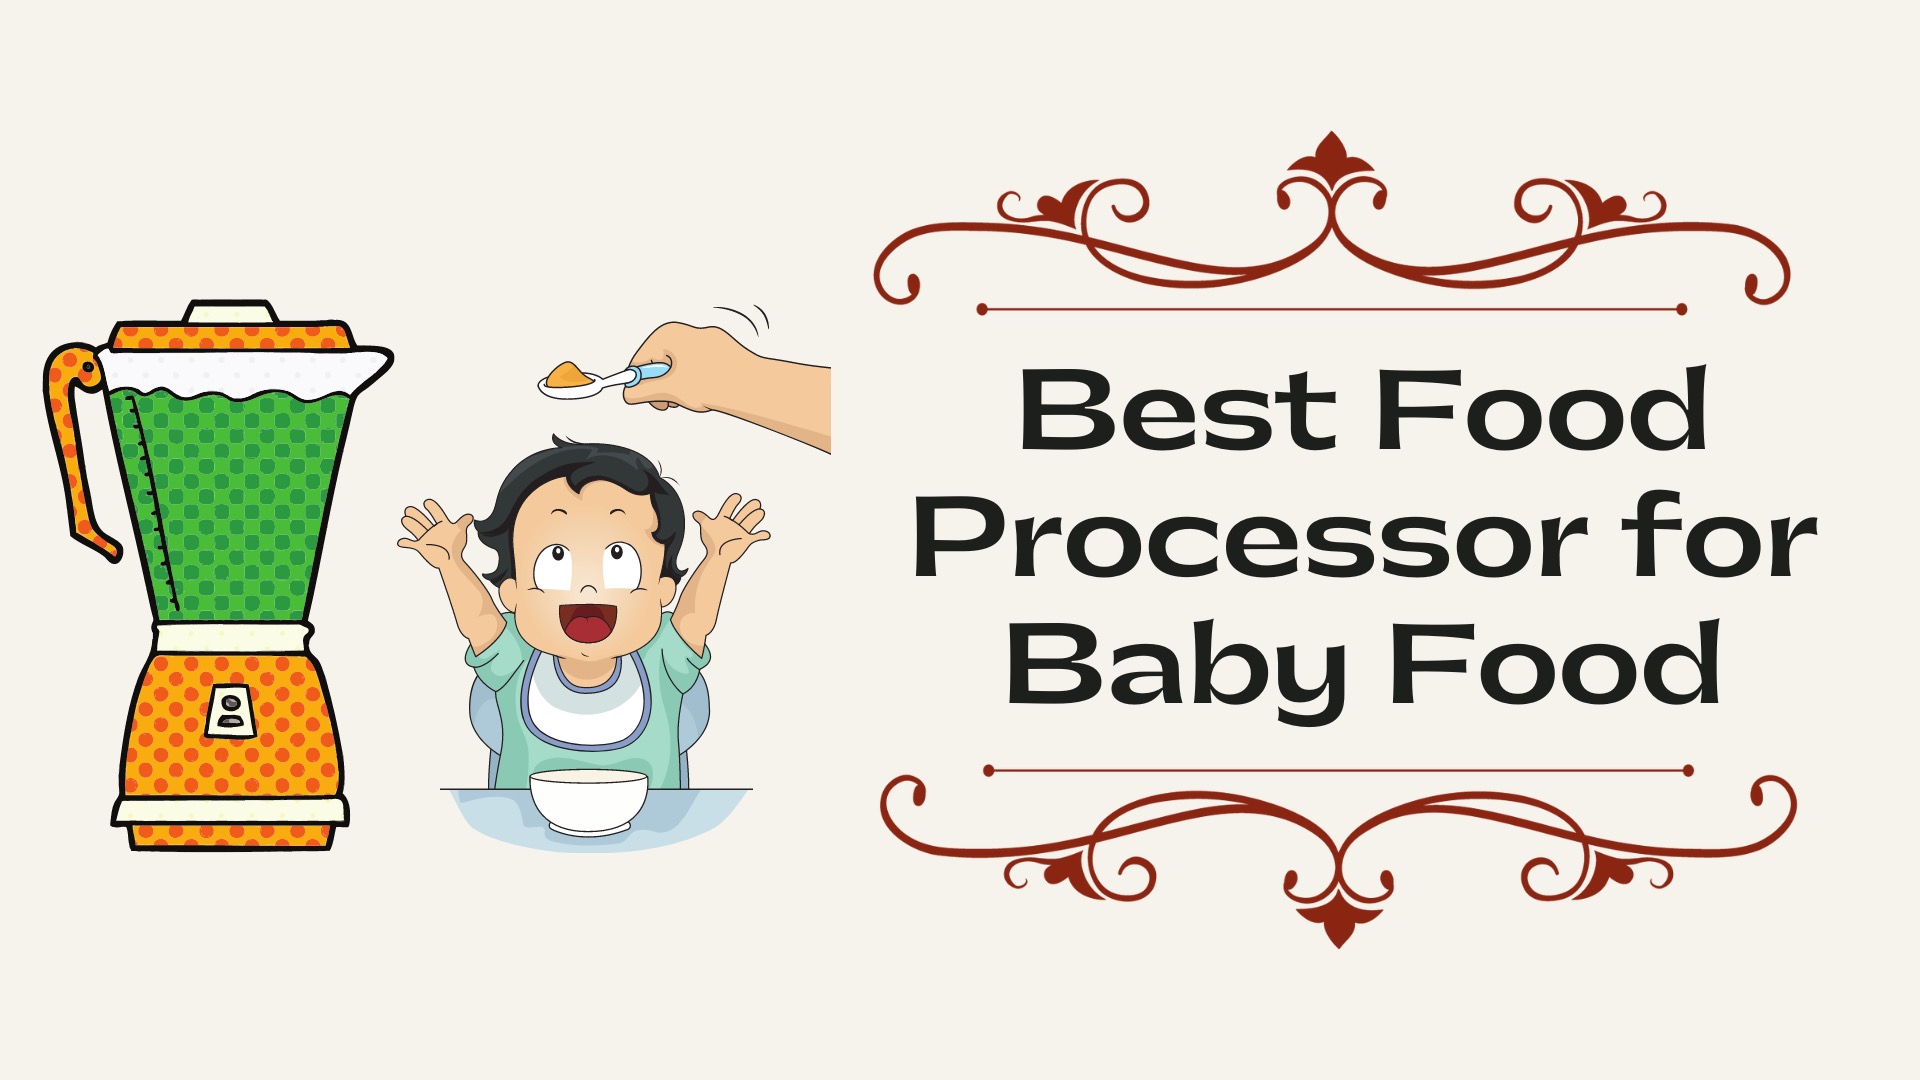 Best Food Processor for Baby Food